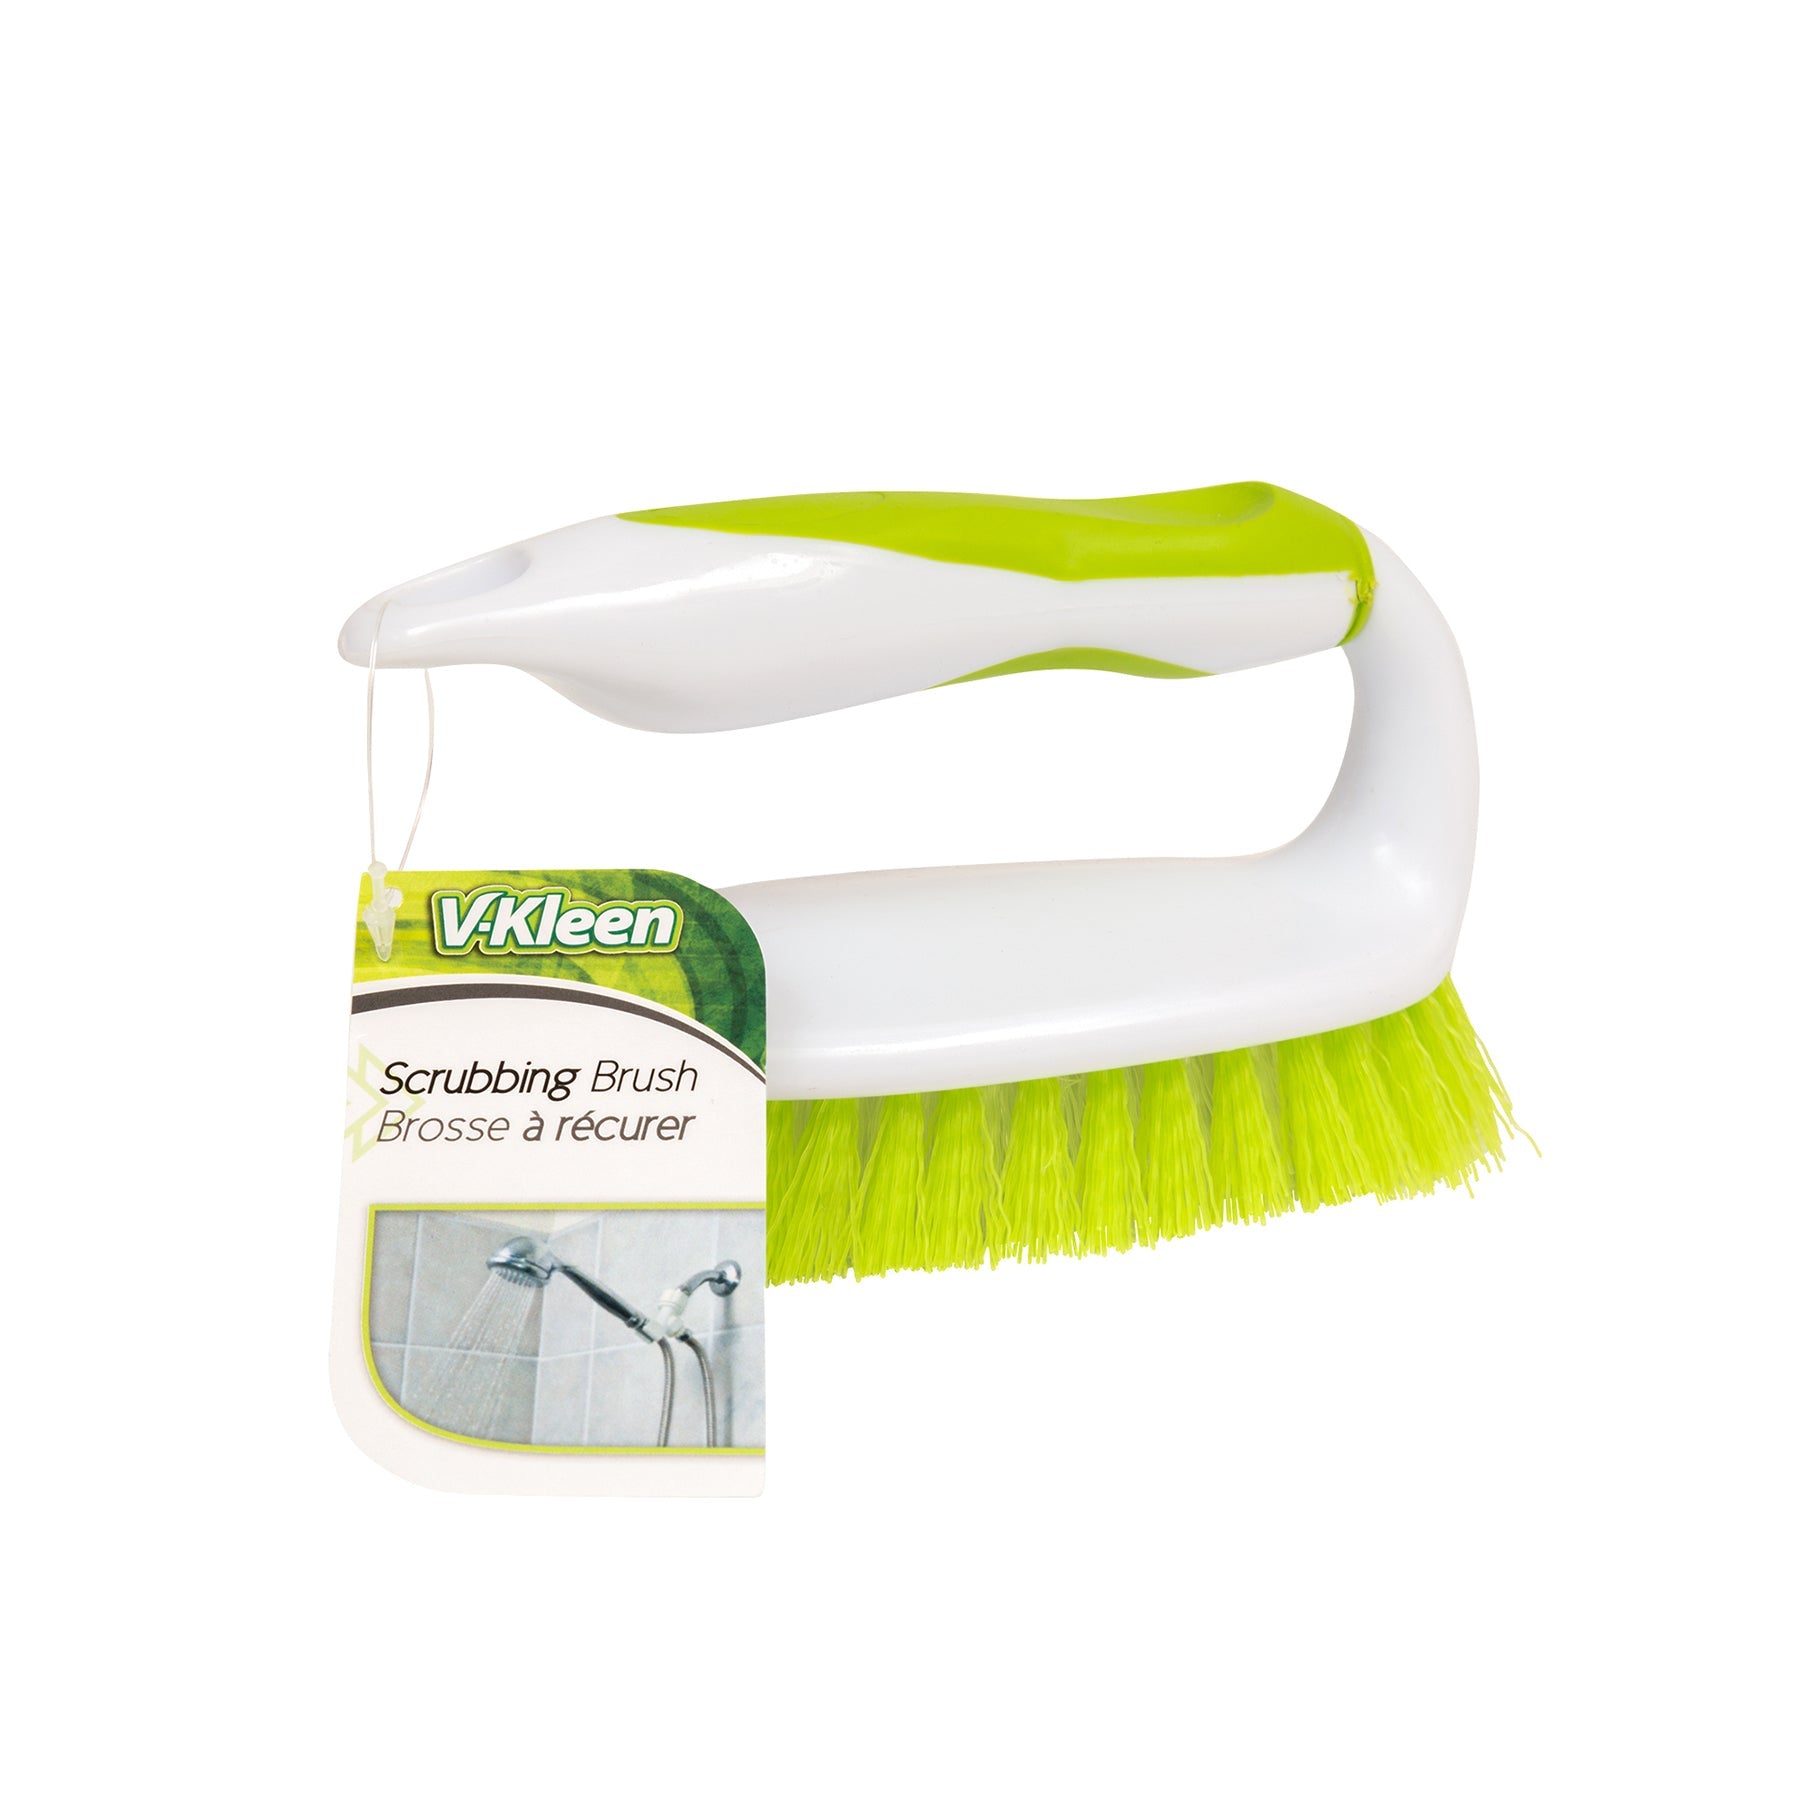 V-Kleen Scrubbing Brush with Handle 5.5x2.75in